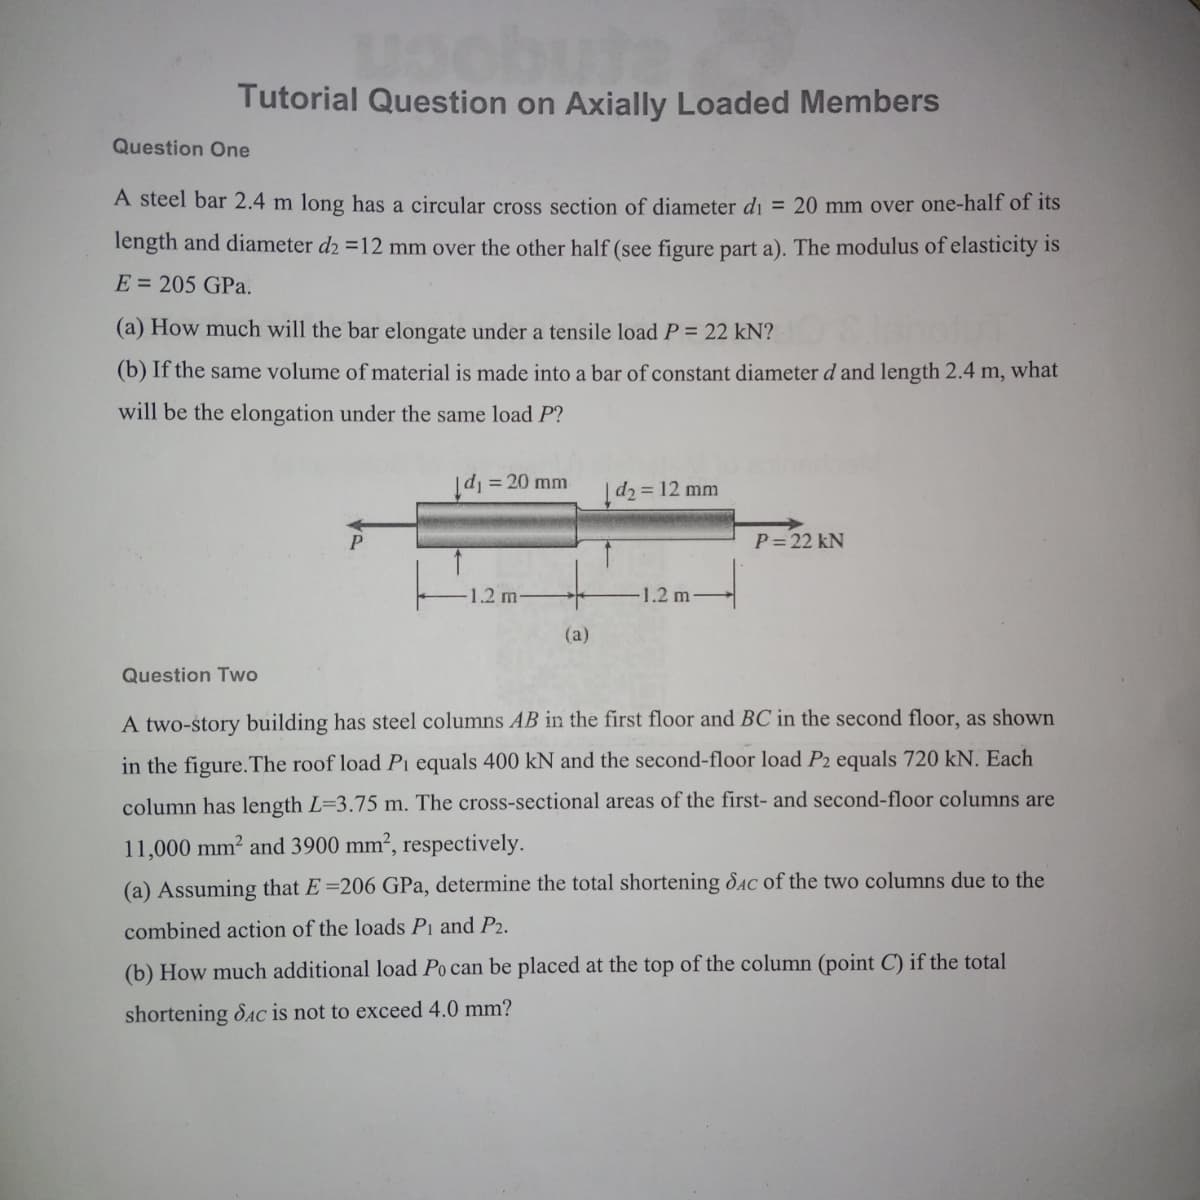 Tutorial Question on Axially Loaded Members
Question One
A steel bar 2.4 m long has a circular cross section of diameter d₁ = 20 mm over one-half of its
length and diameter d2 =12 mm over the other half (see figure part a). The modulus of elasticity is
E = 205 GPa.
(a) How much will the bar elongate under a tensile load P = 22 kN?
(b) If the same volume of material is made into a bar of constant diameter d and length 2.4 m, what
will be the elongation under the same load P?
|d₁ = 20 mm
d₂
= 12 mm
P
P=22 kN
1.2 m
1.2 m
(a)
Question Two
A two-story building has steel columns AB in the first floor and BC in the second floor, as shown
in the figure. The roof load Pi equals 400 kN and the second-floor load P2 equals 720 kN. Each
column has length L-3.75 m. The cross-sectional areas of the first- and second-floor columns are
11,000 mm² and 3900 mm², respectively.
(a) Assuming that E=206 GPa, determine the total shortening Sac of the two columns due to the
combined action of the loads P1 and P2.
(b) How much additional load Po can be placed at the top of the column (point C) if the total
shortening Sac is not to exceed 4.0 mm?